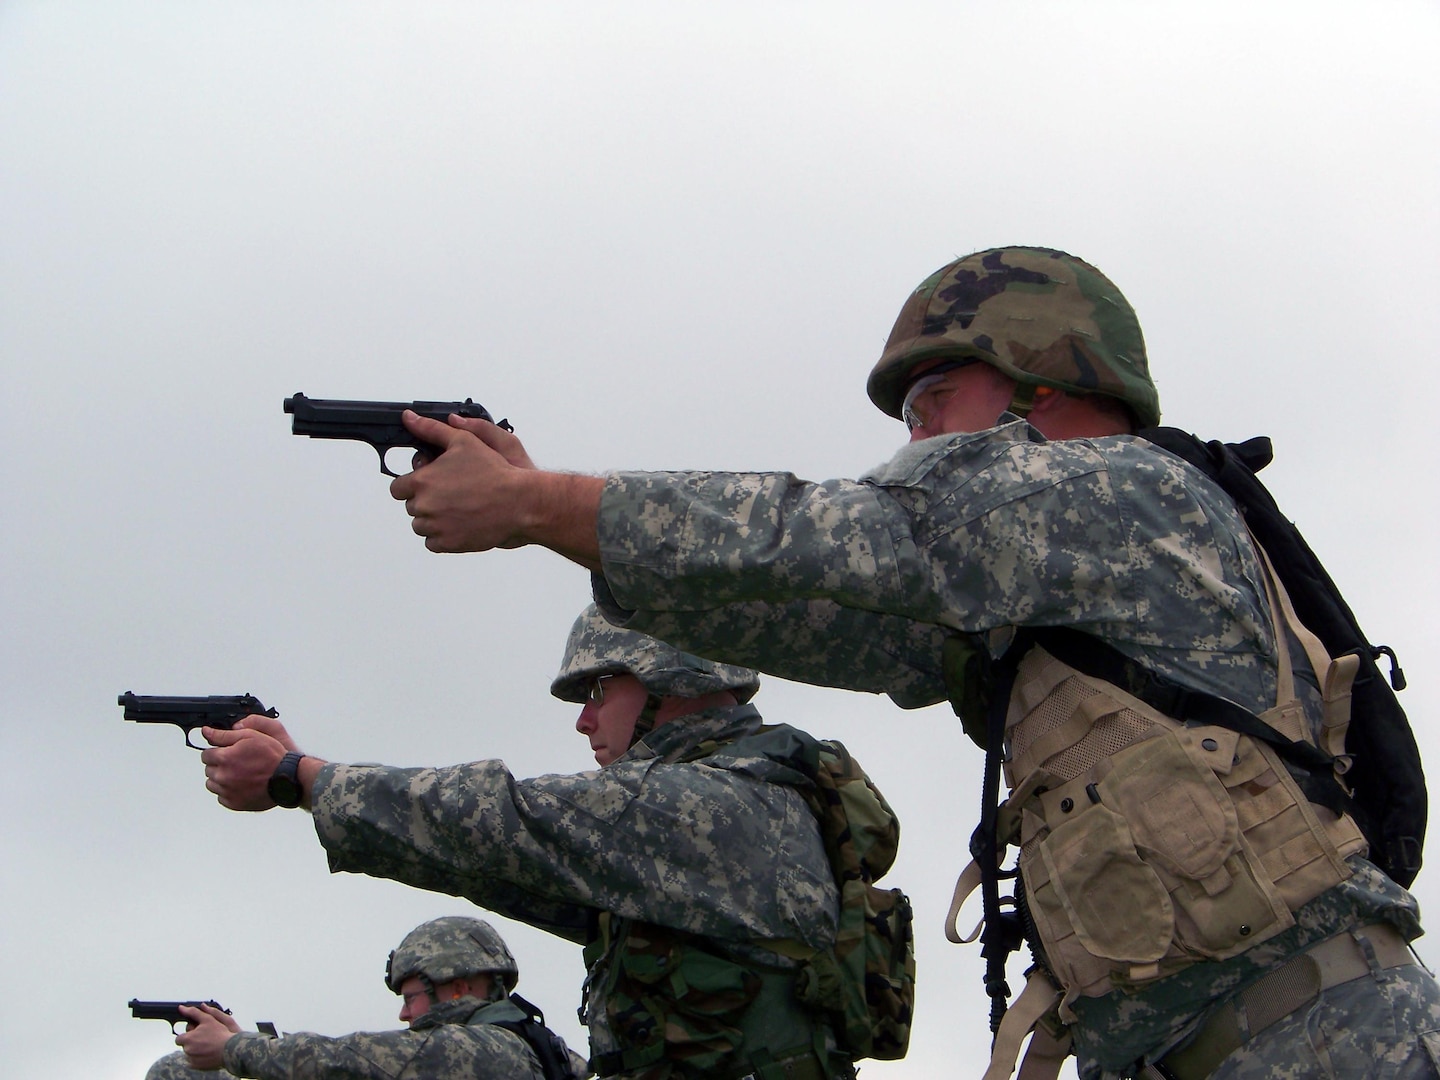 Soldiers with the Missouri National Guard take aim during the 2010 Adjutant General State Rifle/Pistol Combat Match at Camp Crowder, Missouri.